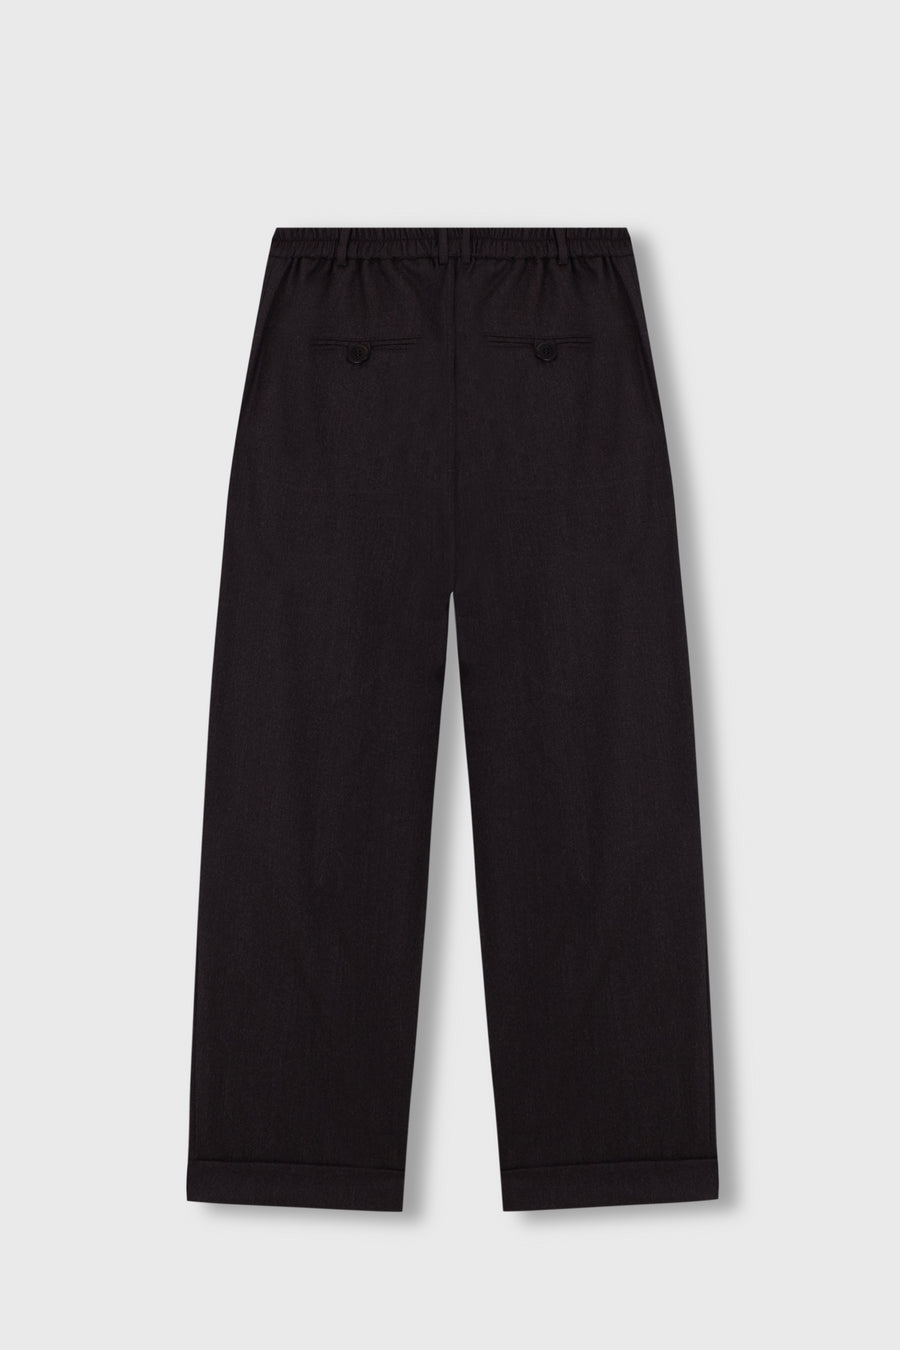 WOOL MASCULINE PANTS - ANTHRACITE